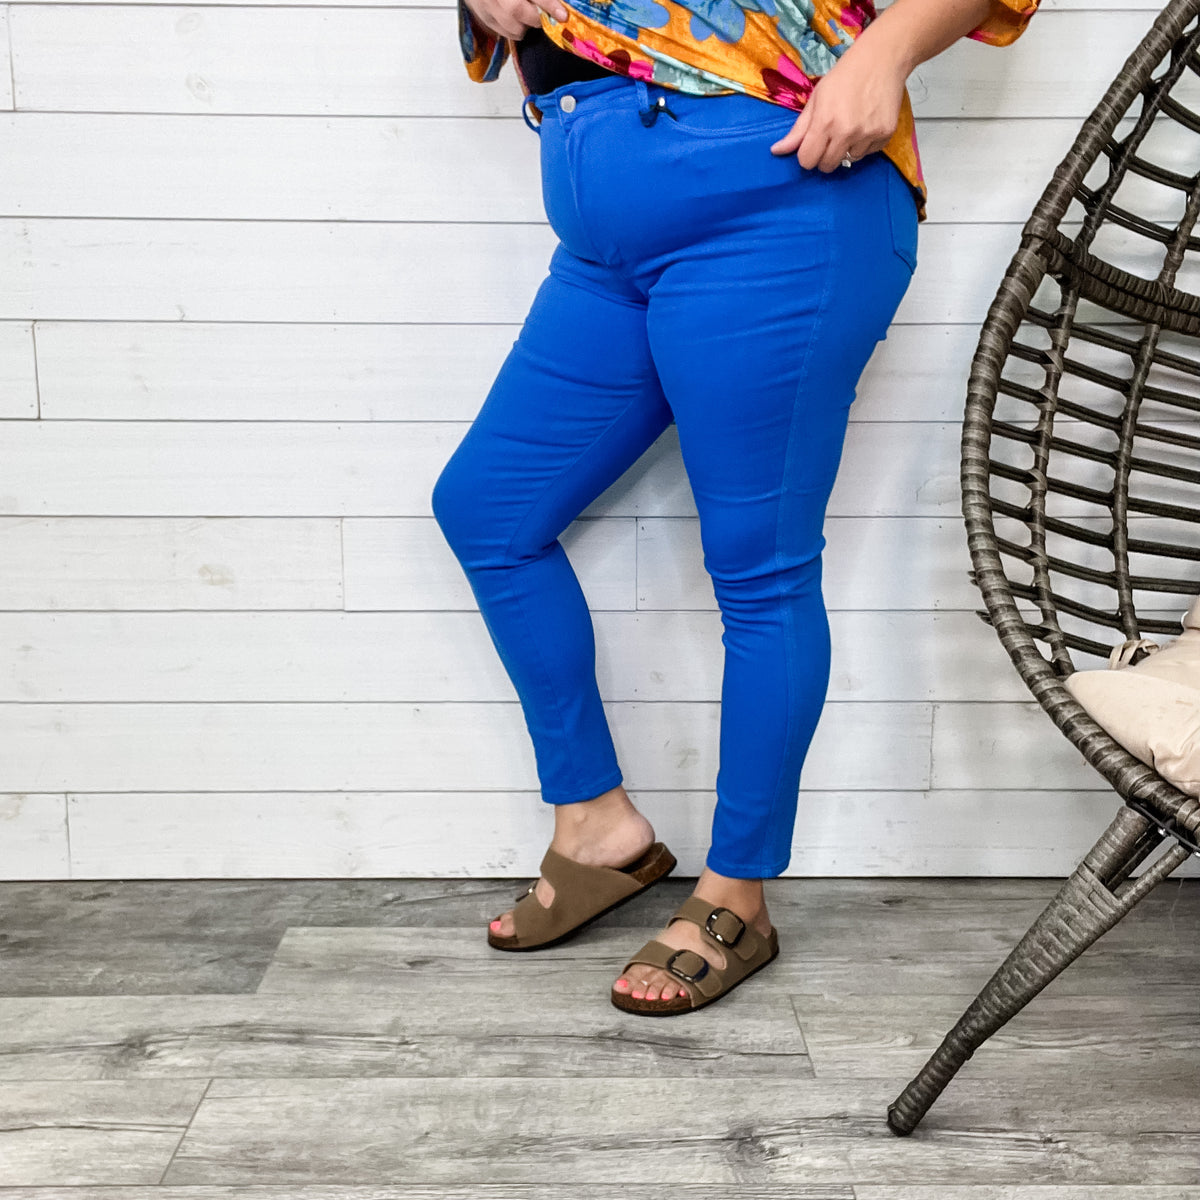 TOP 5 judy blue TUMMY CONTROL jeans! What other top 5 would you love t